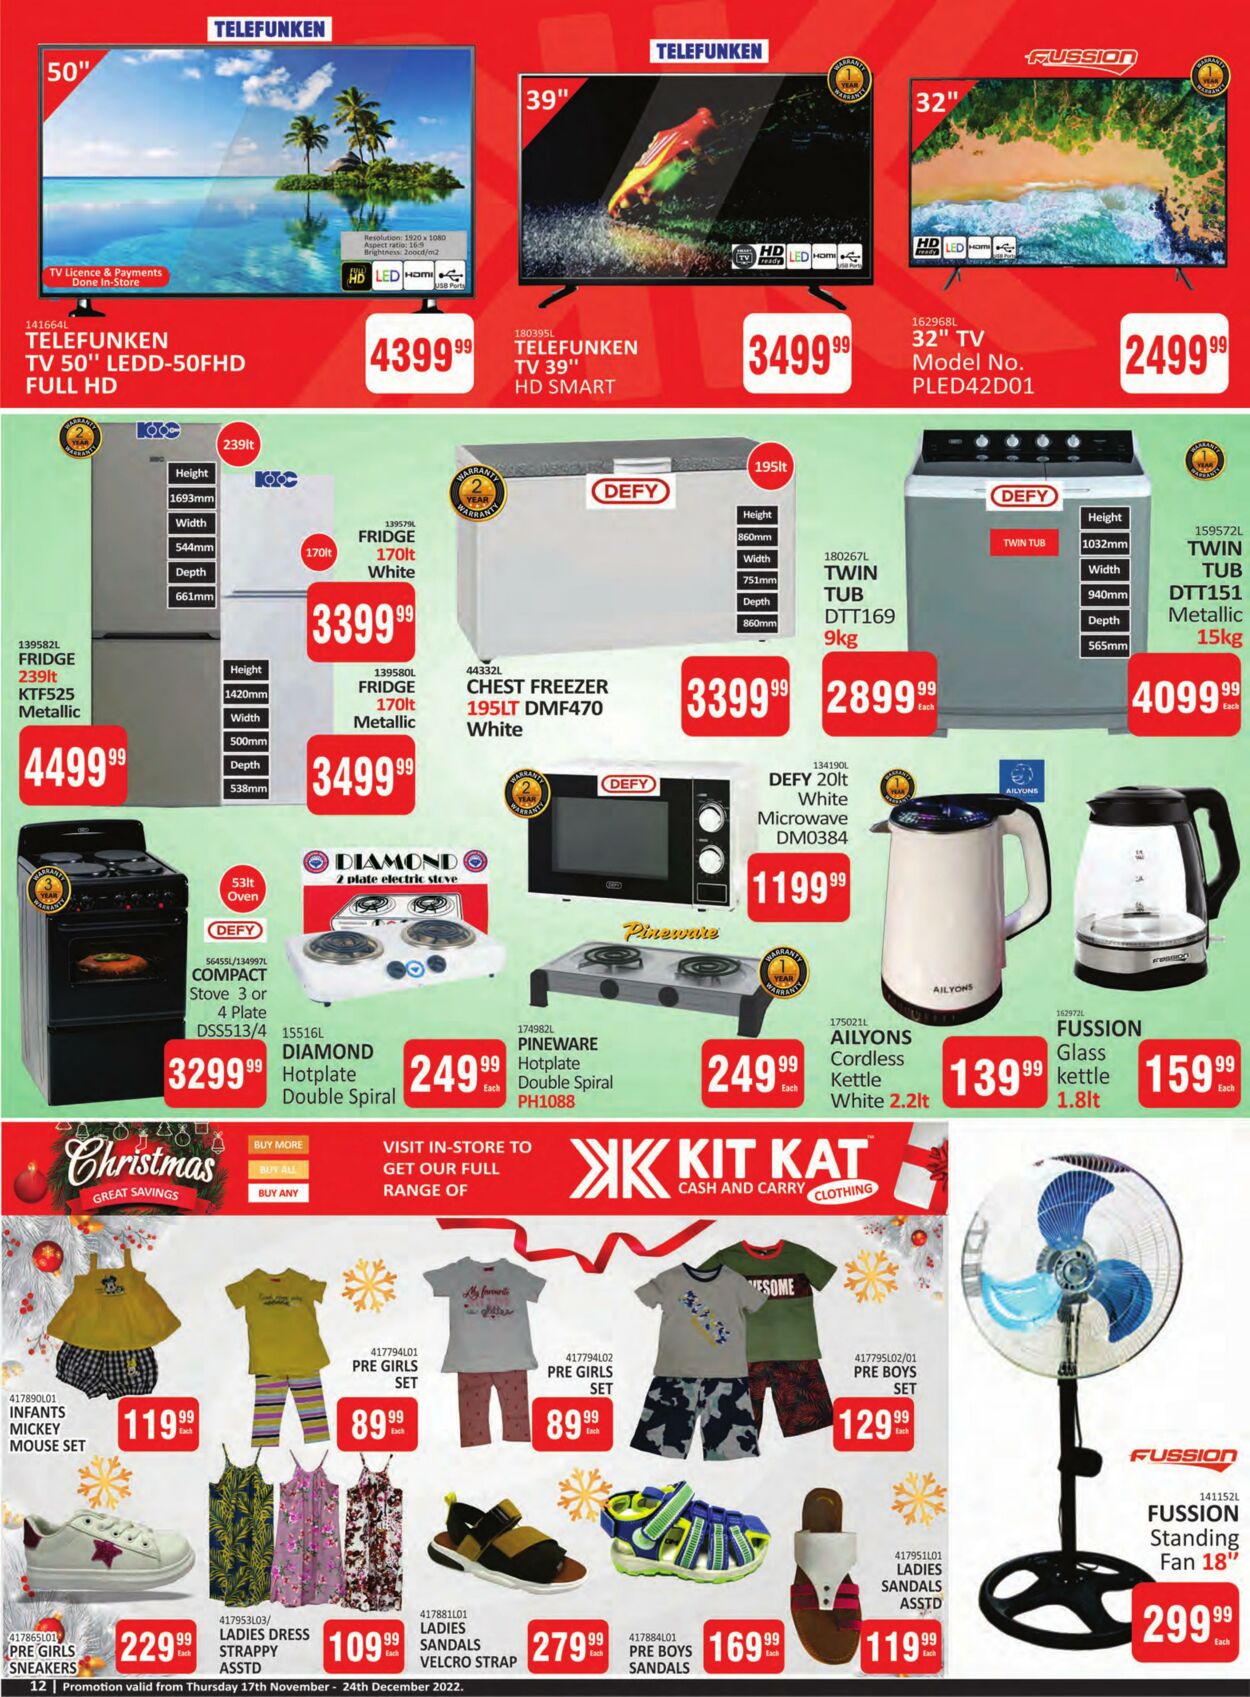 Special Kit Kat Cash and Carry 17.11.2022 - 24.12.2022